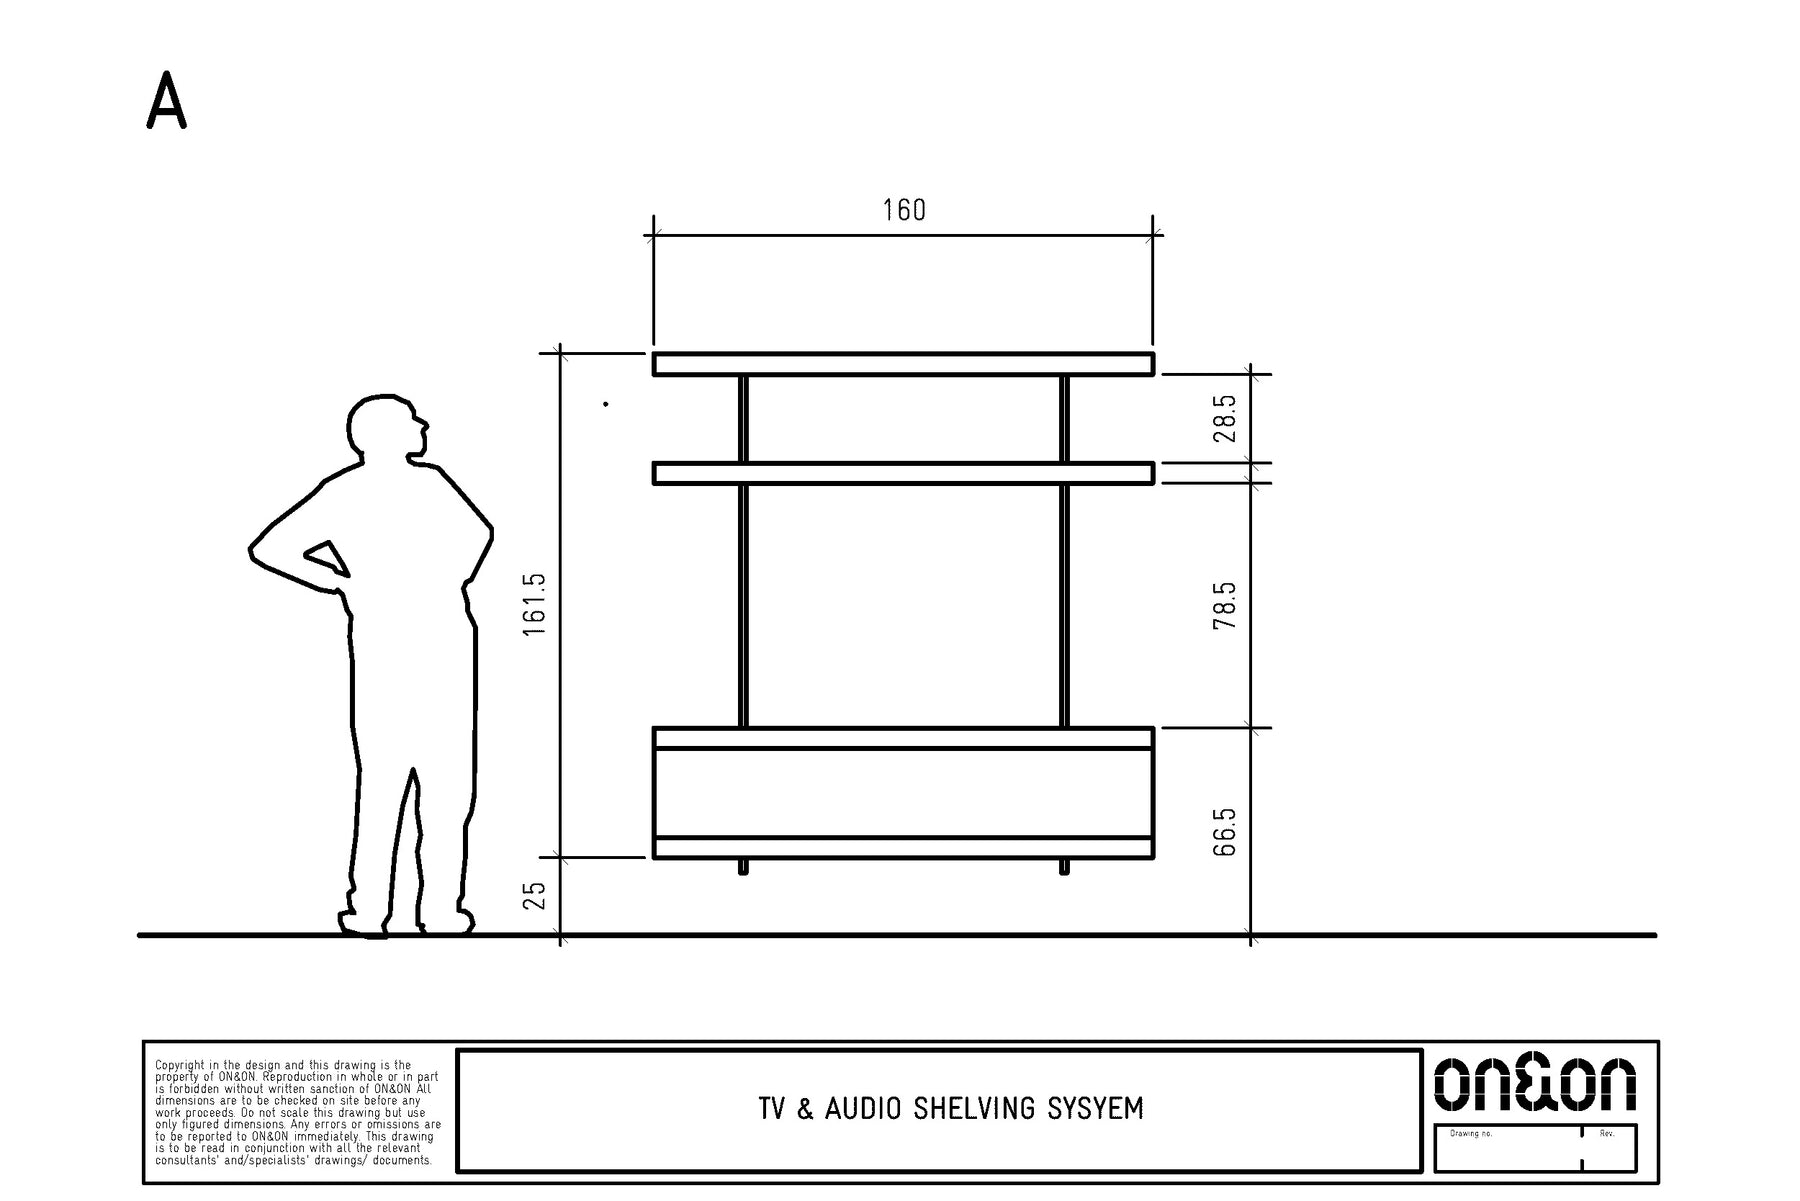 TV unit drawing A with sizes